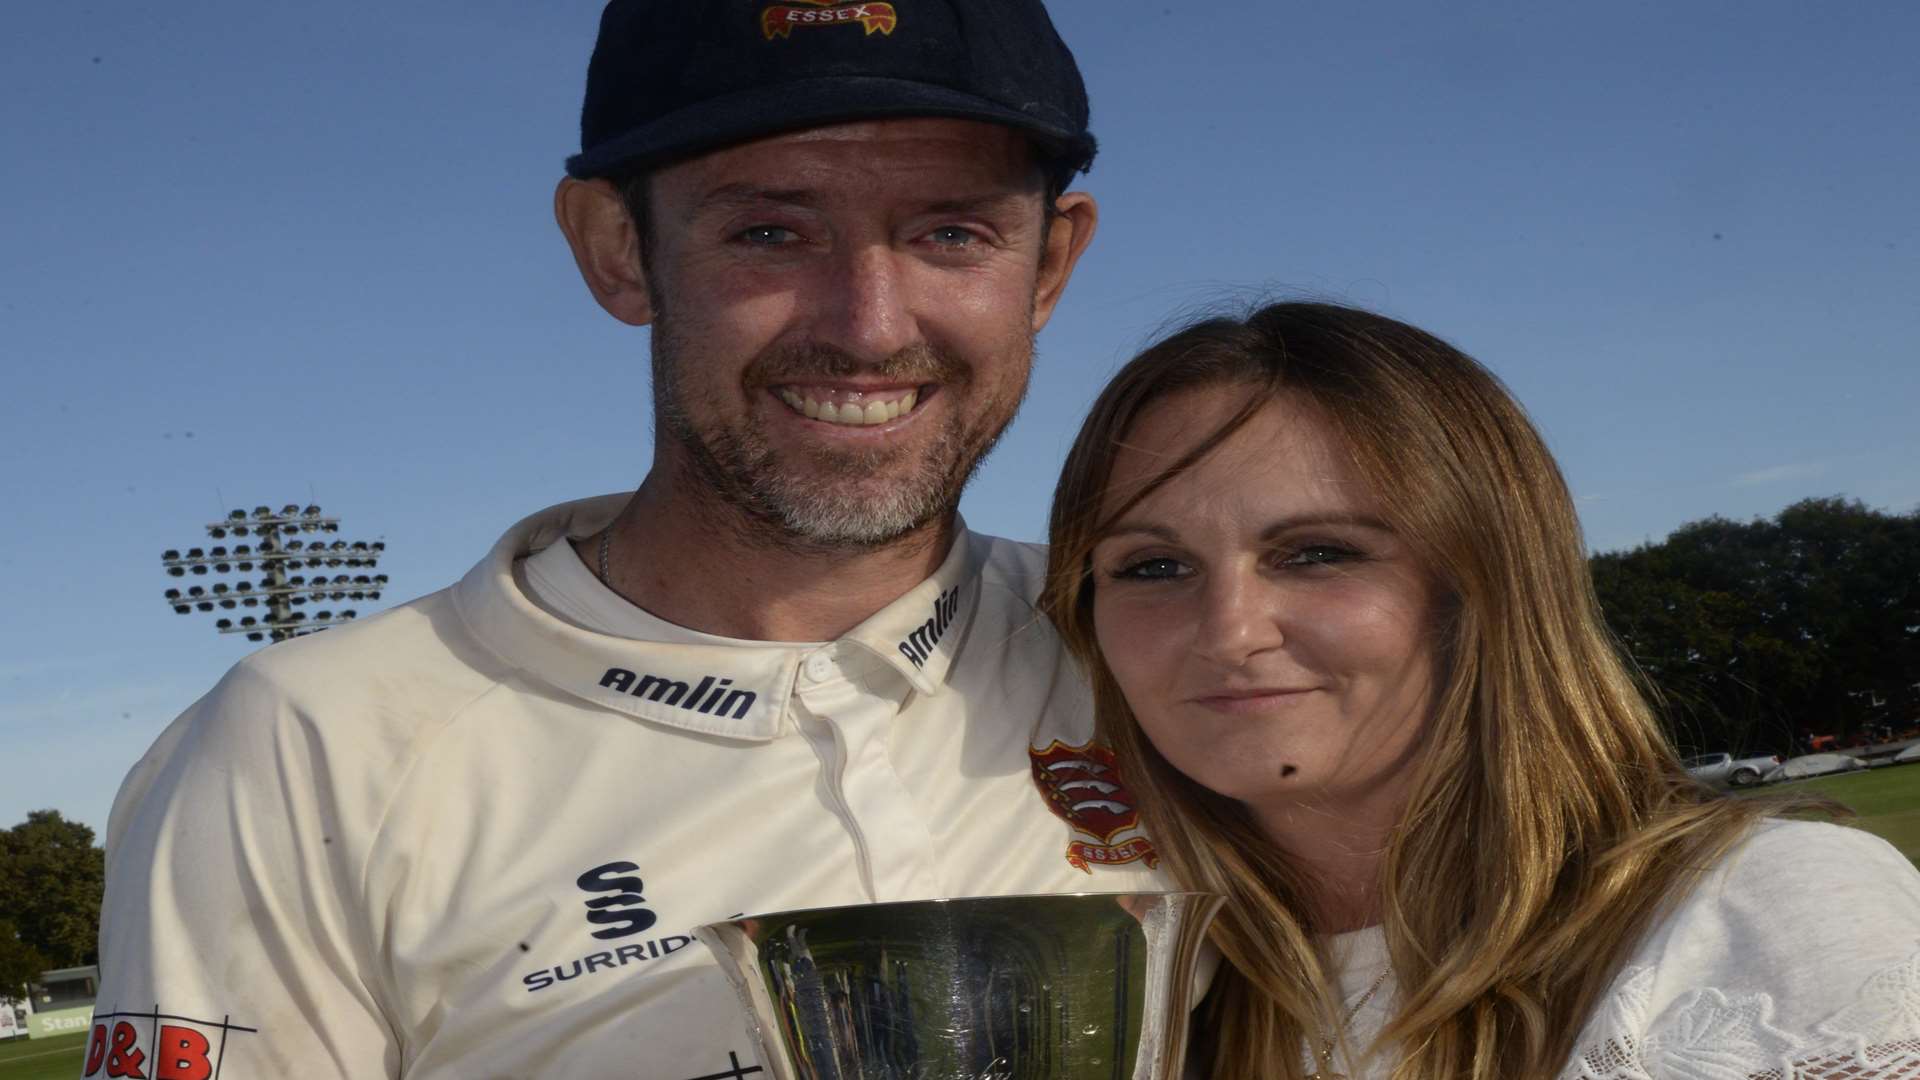 David and wife Jenna with the county championship trophy Picture: Chris Davey